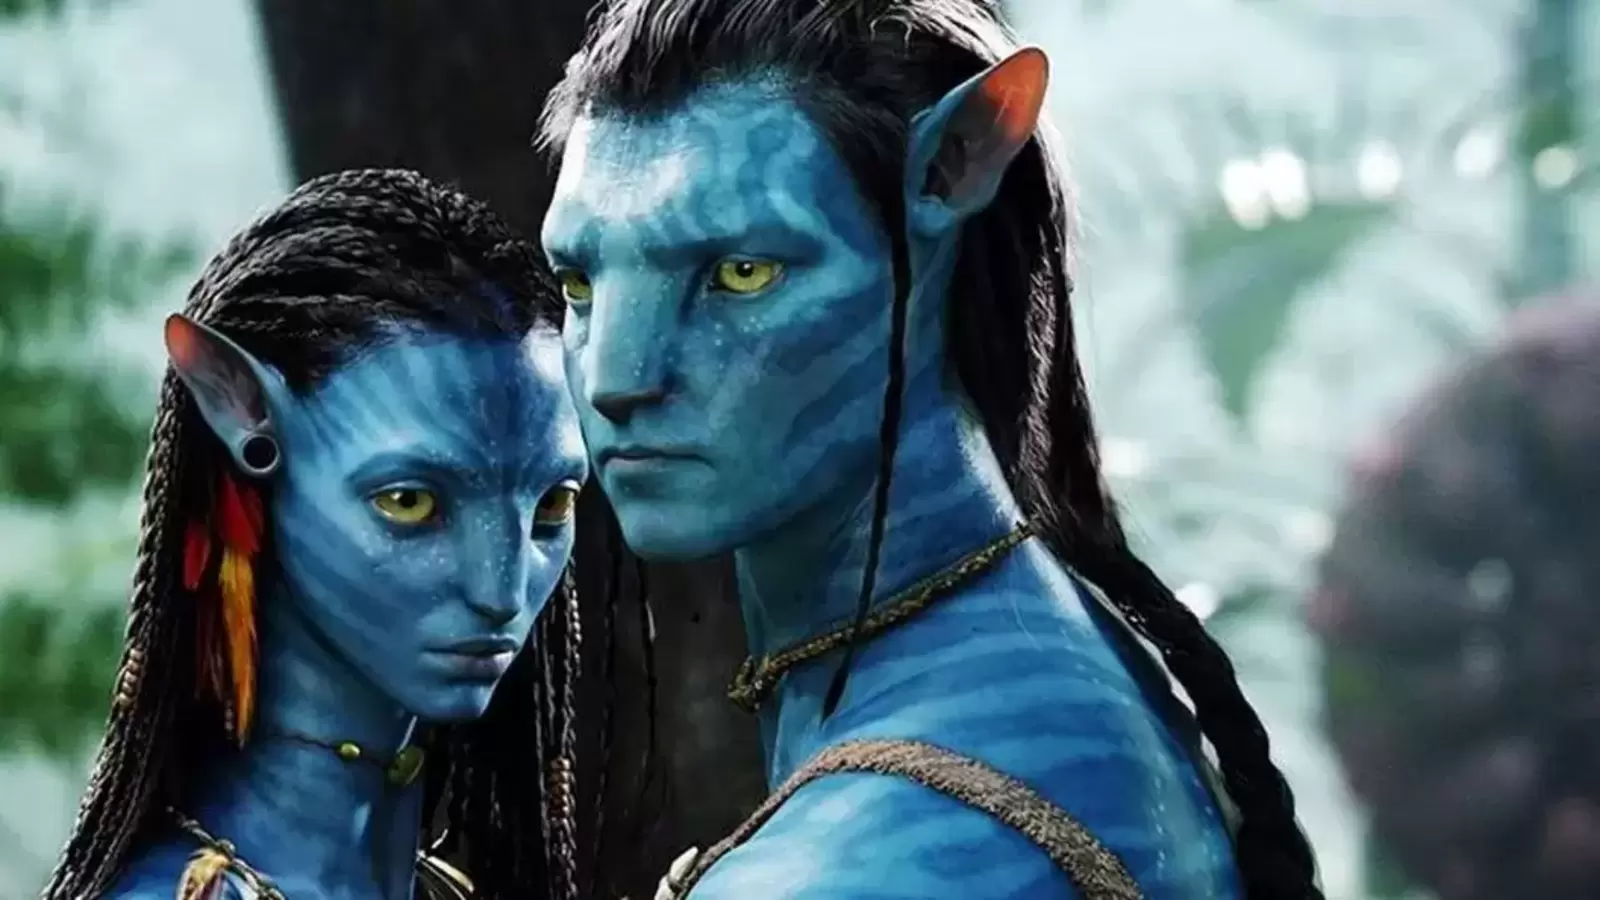 Avatar 2: James Cameron film finally gets official title and release date |  Hollywood - Hindustan Times